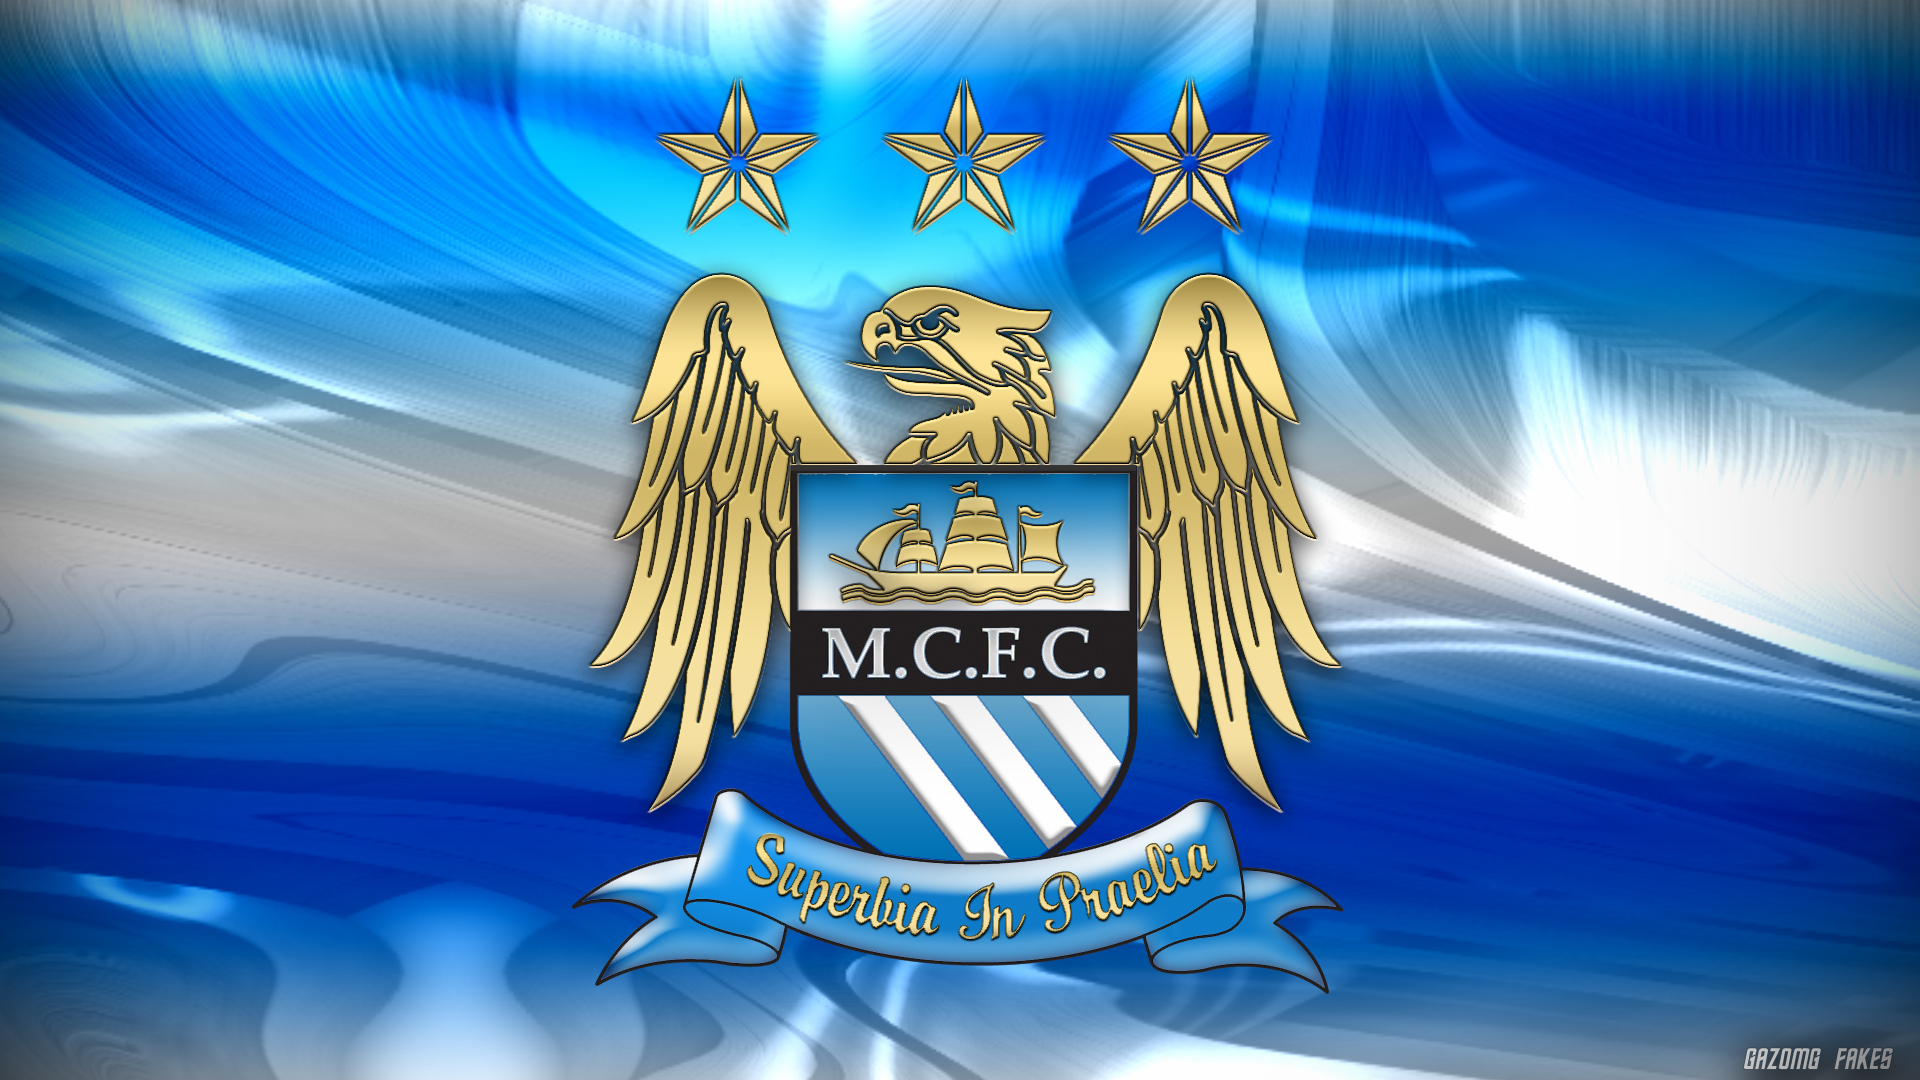 Wallpapers Sports Manchester City Wallpaper